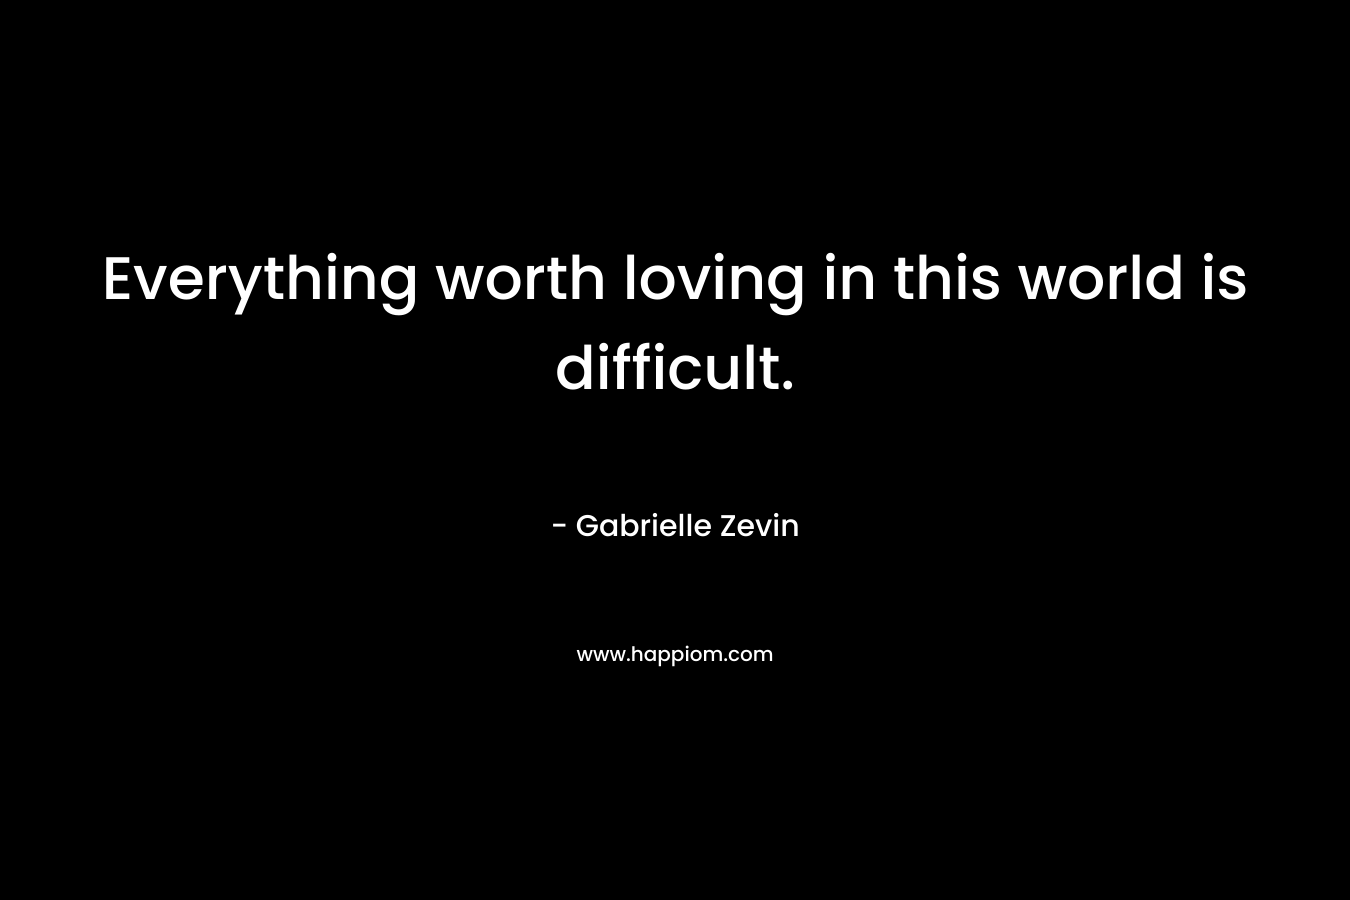 Everything worth loving in this world is difficult.